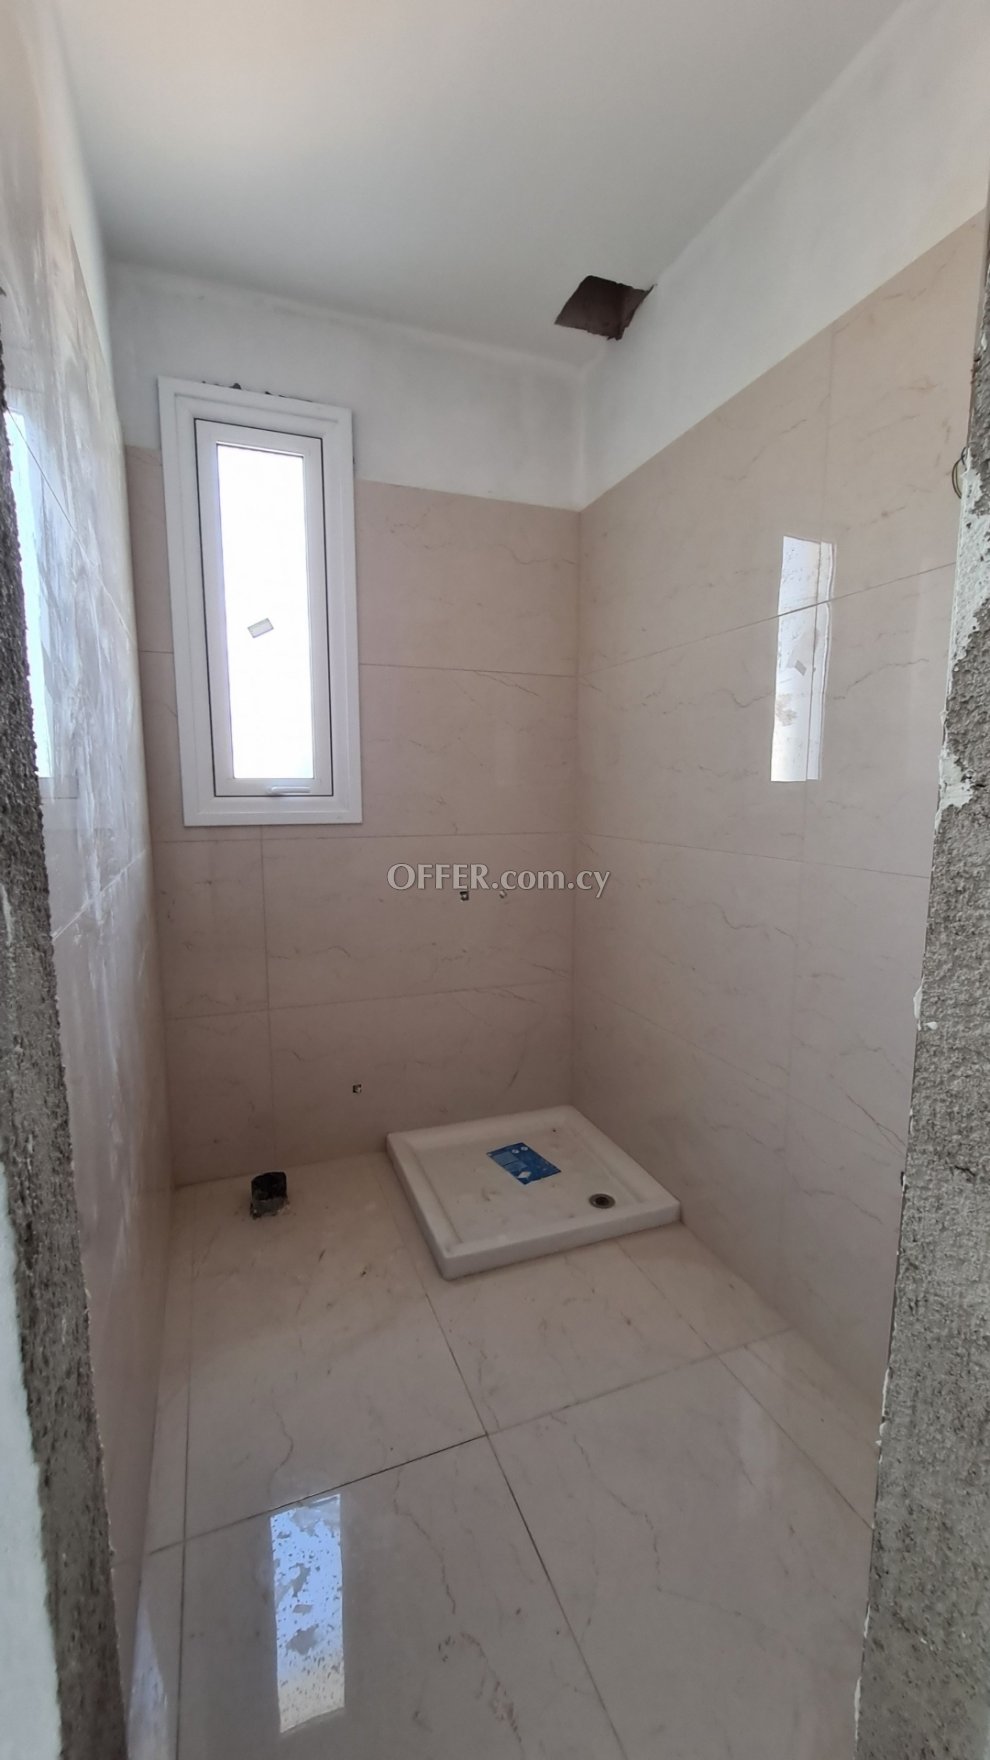 New 3 floor House in the Center of Paphos - 2